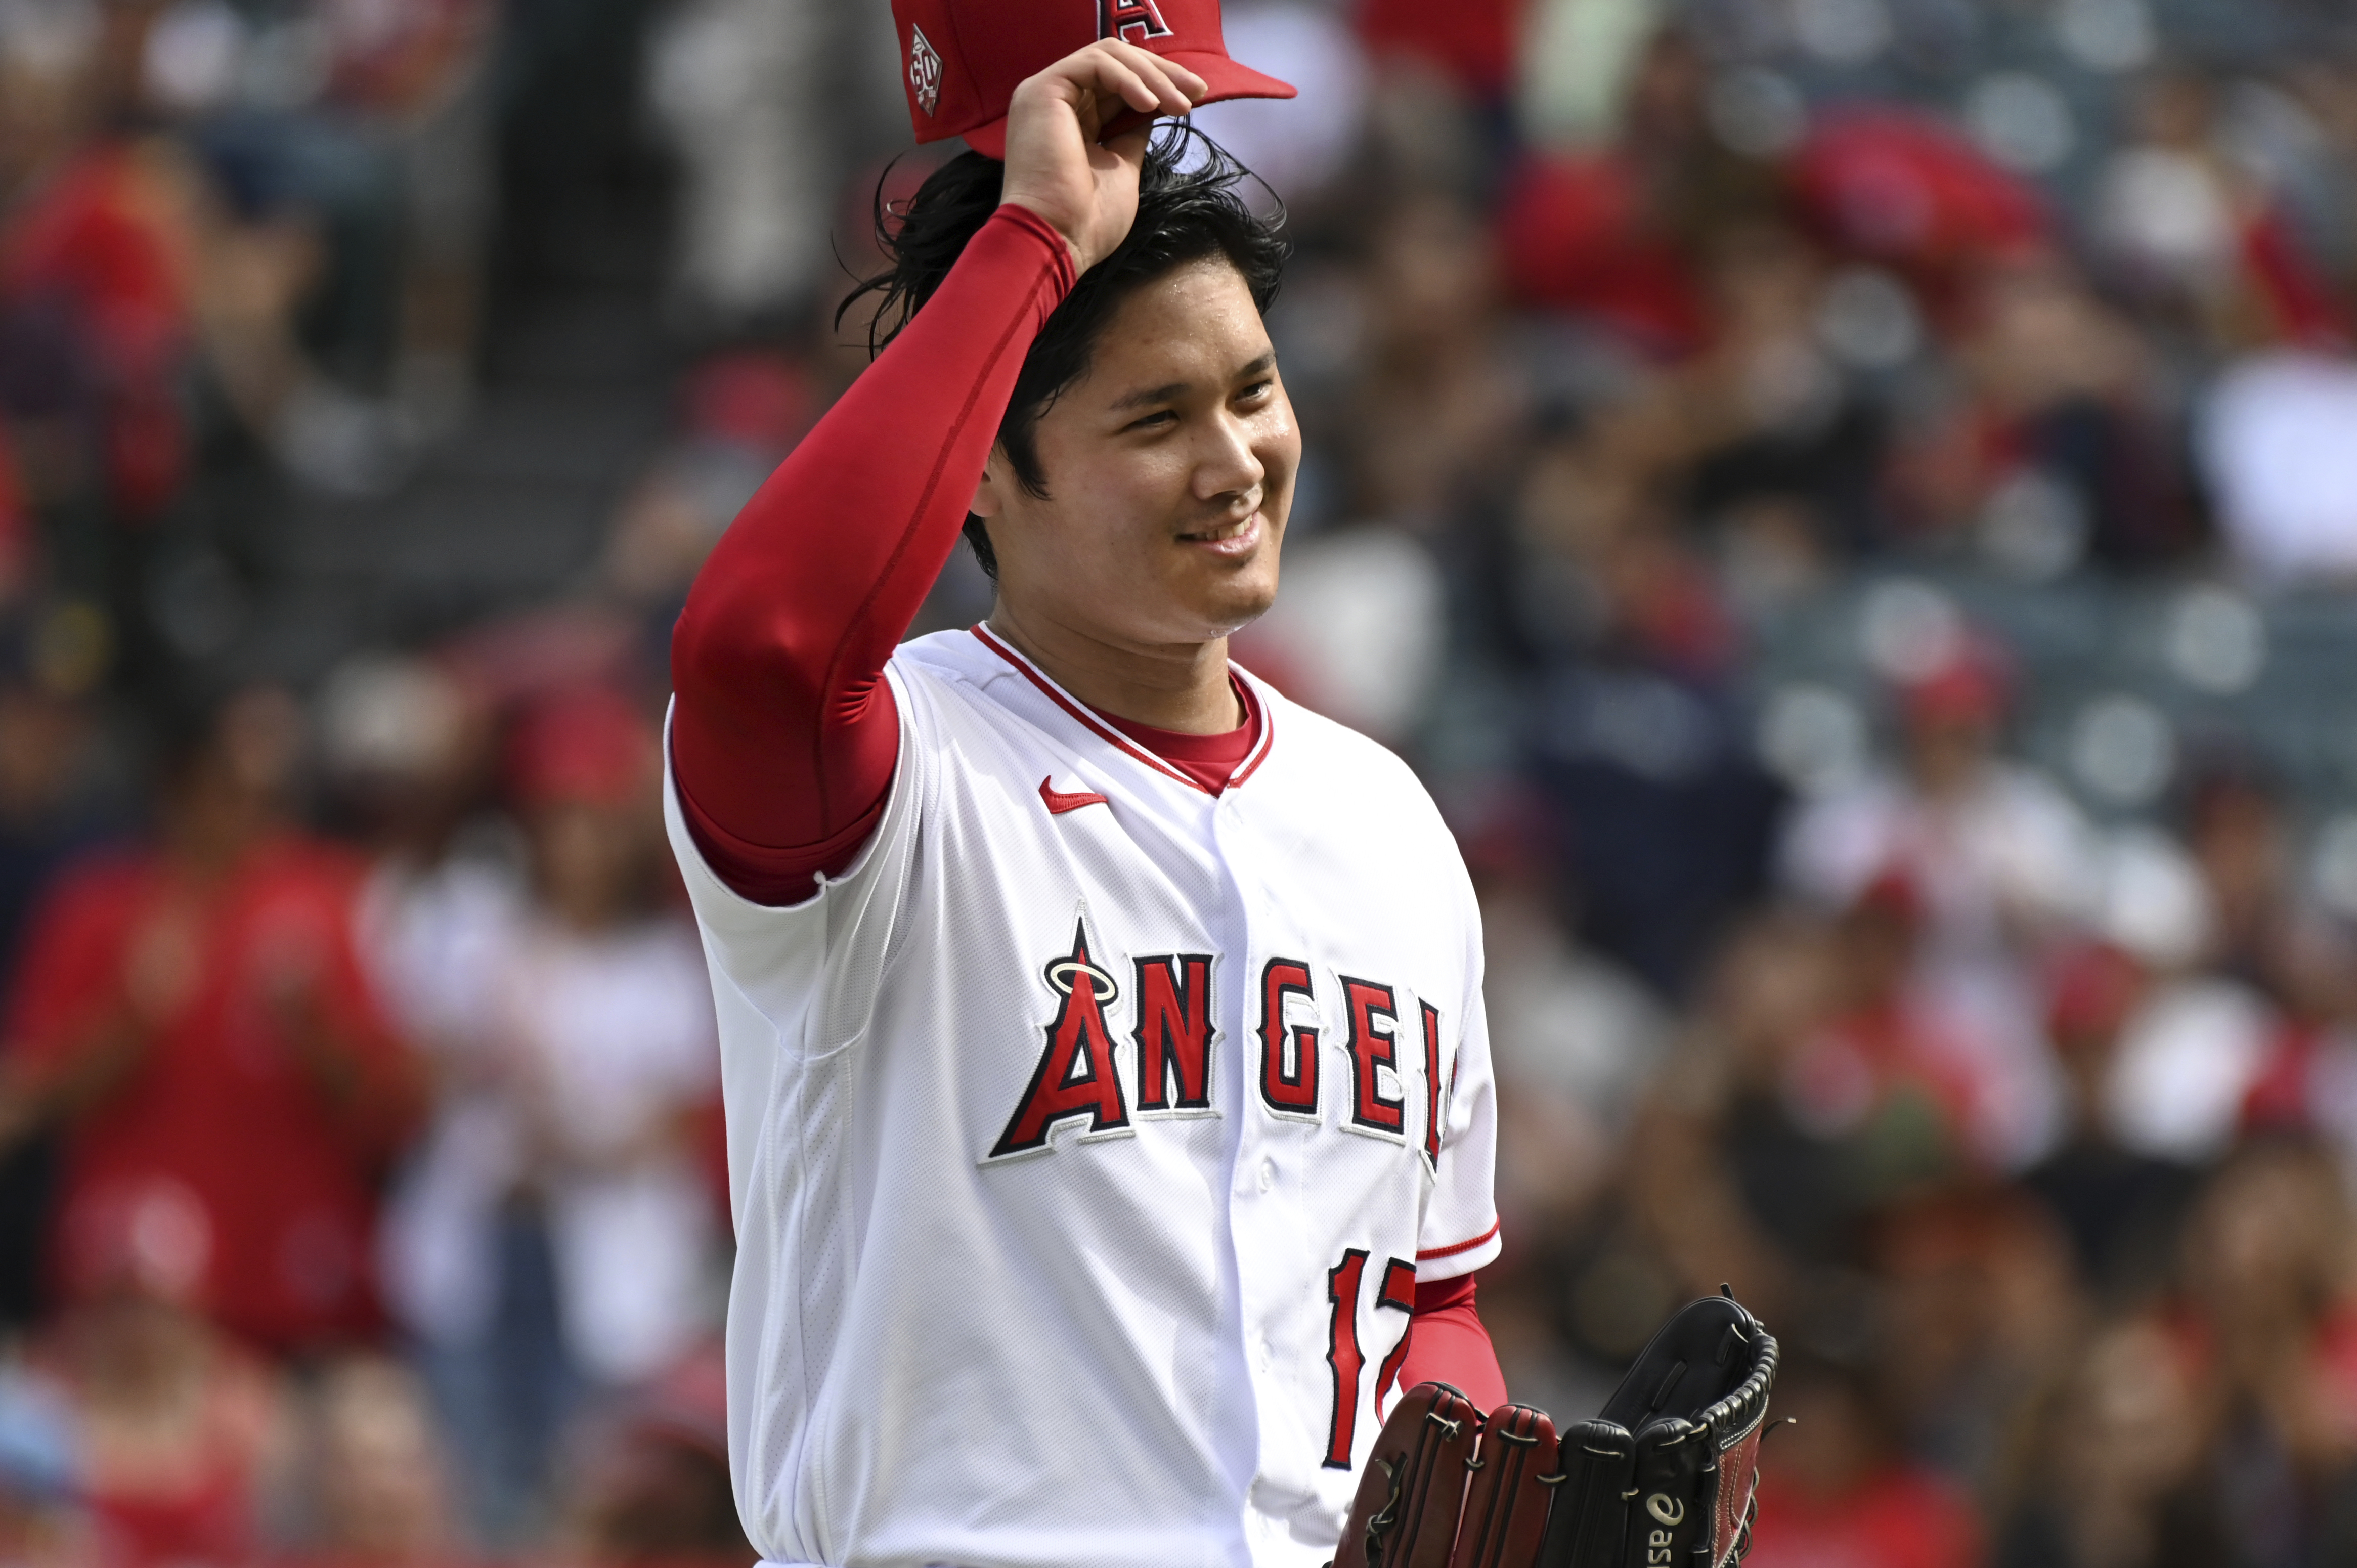 Noah's comment today : r/angelsbaseball